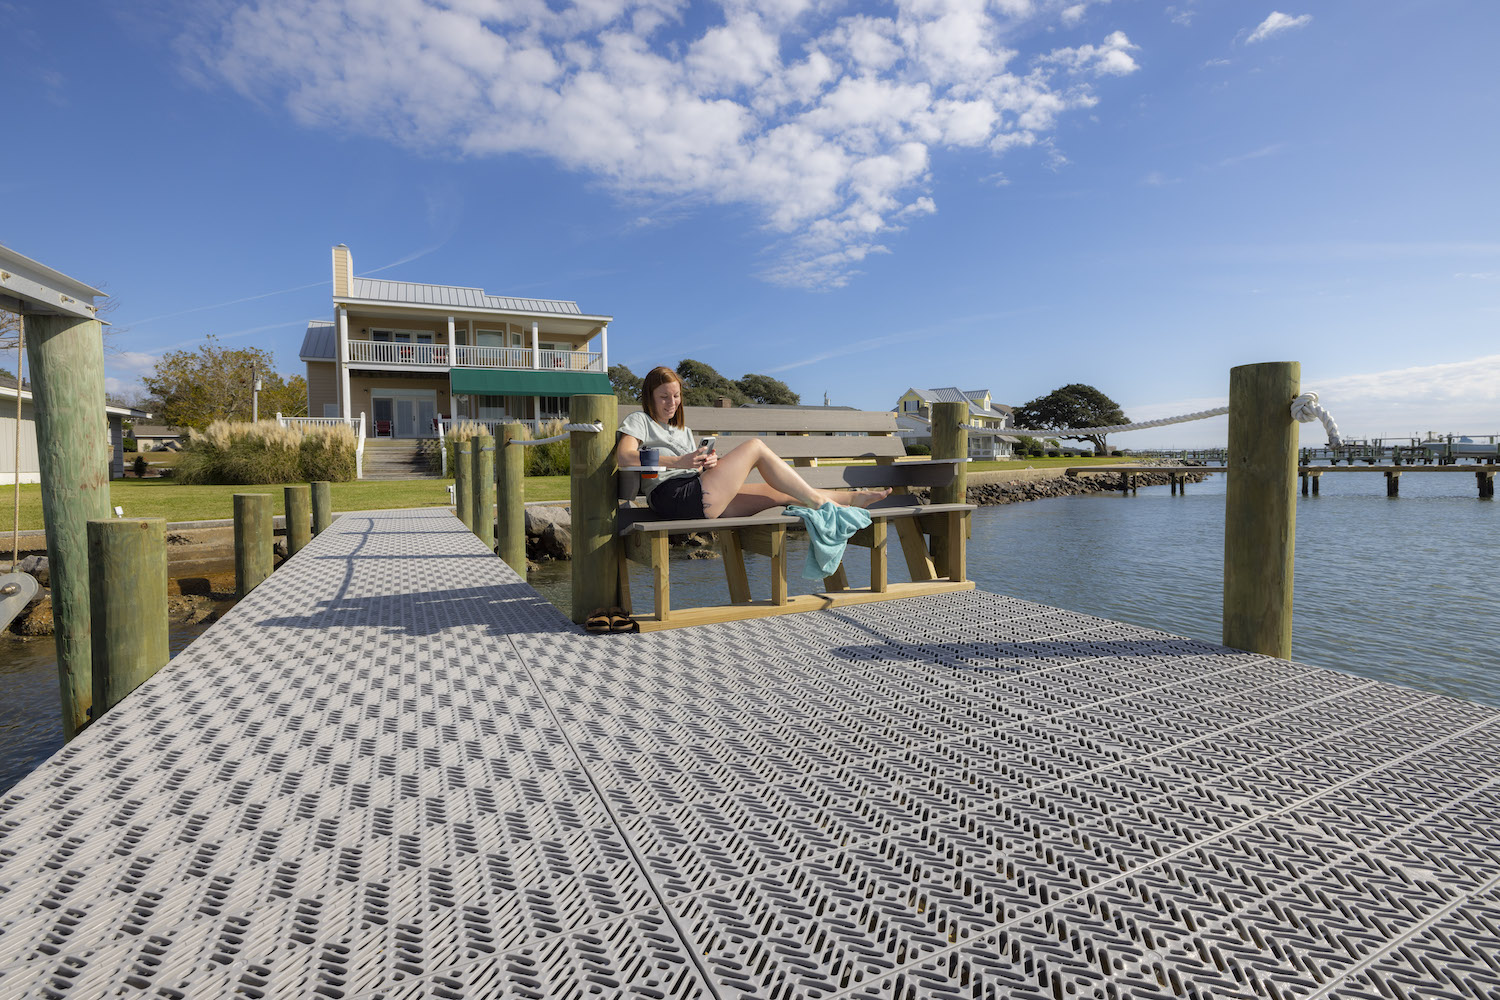 There is a person sitting on a dock bench looking at their phone. There is a house behind the person at the base of the dock and water surrounds the dock.